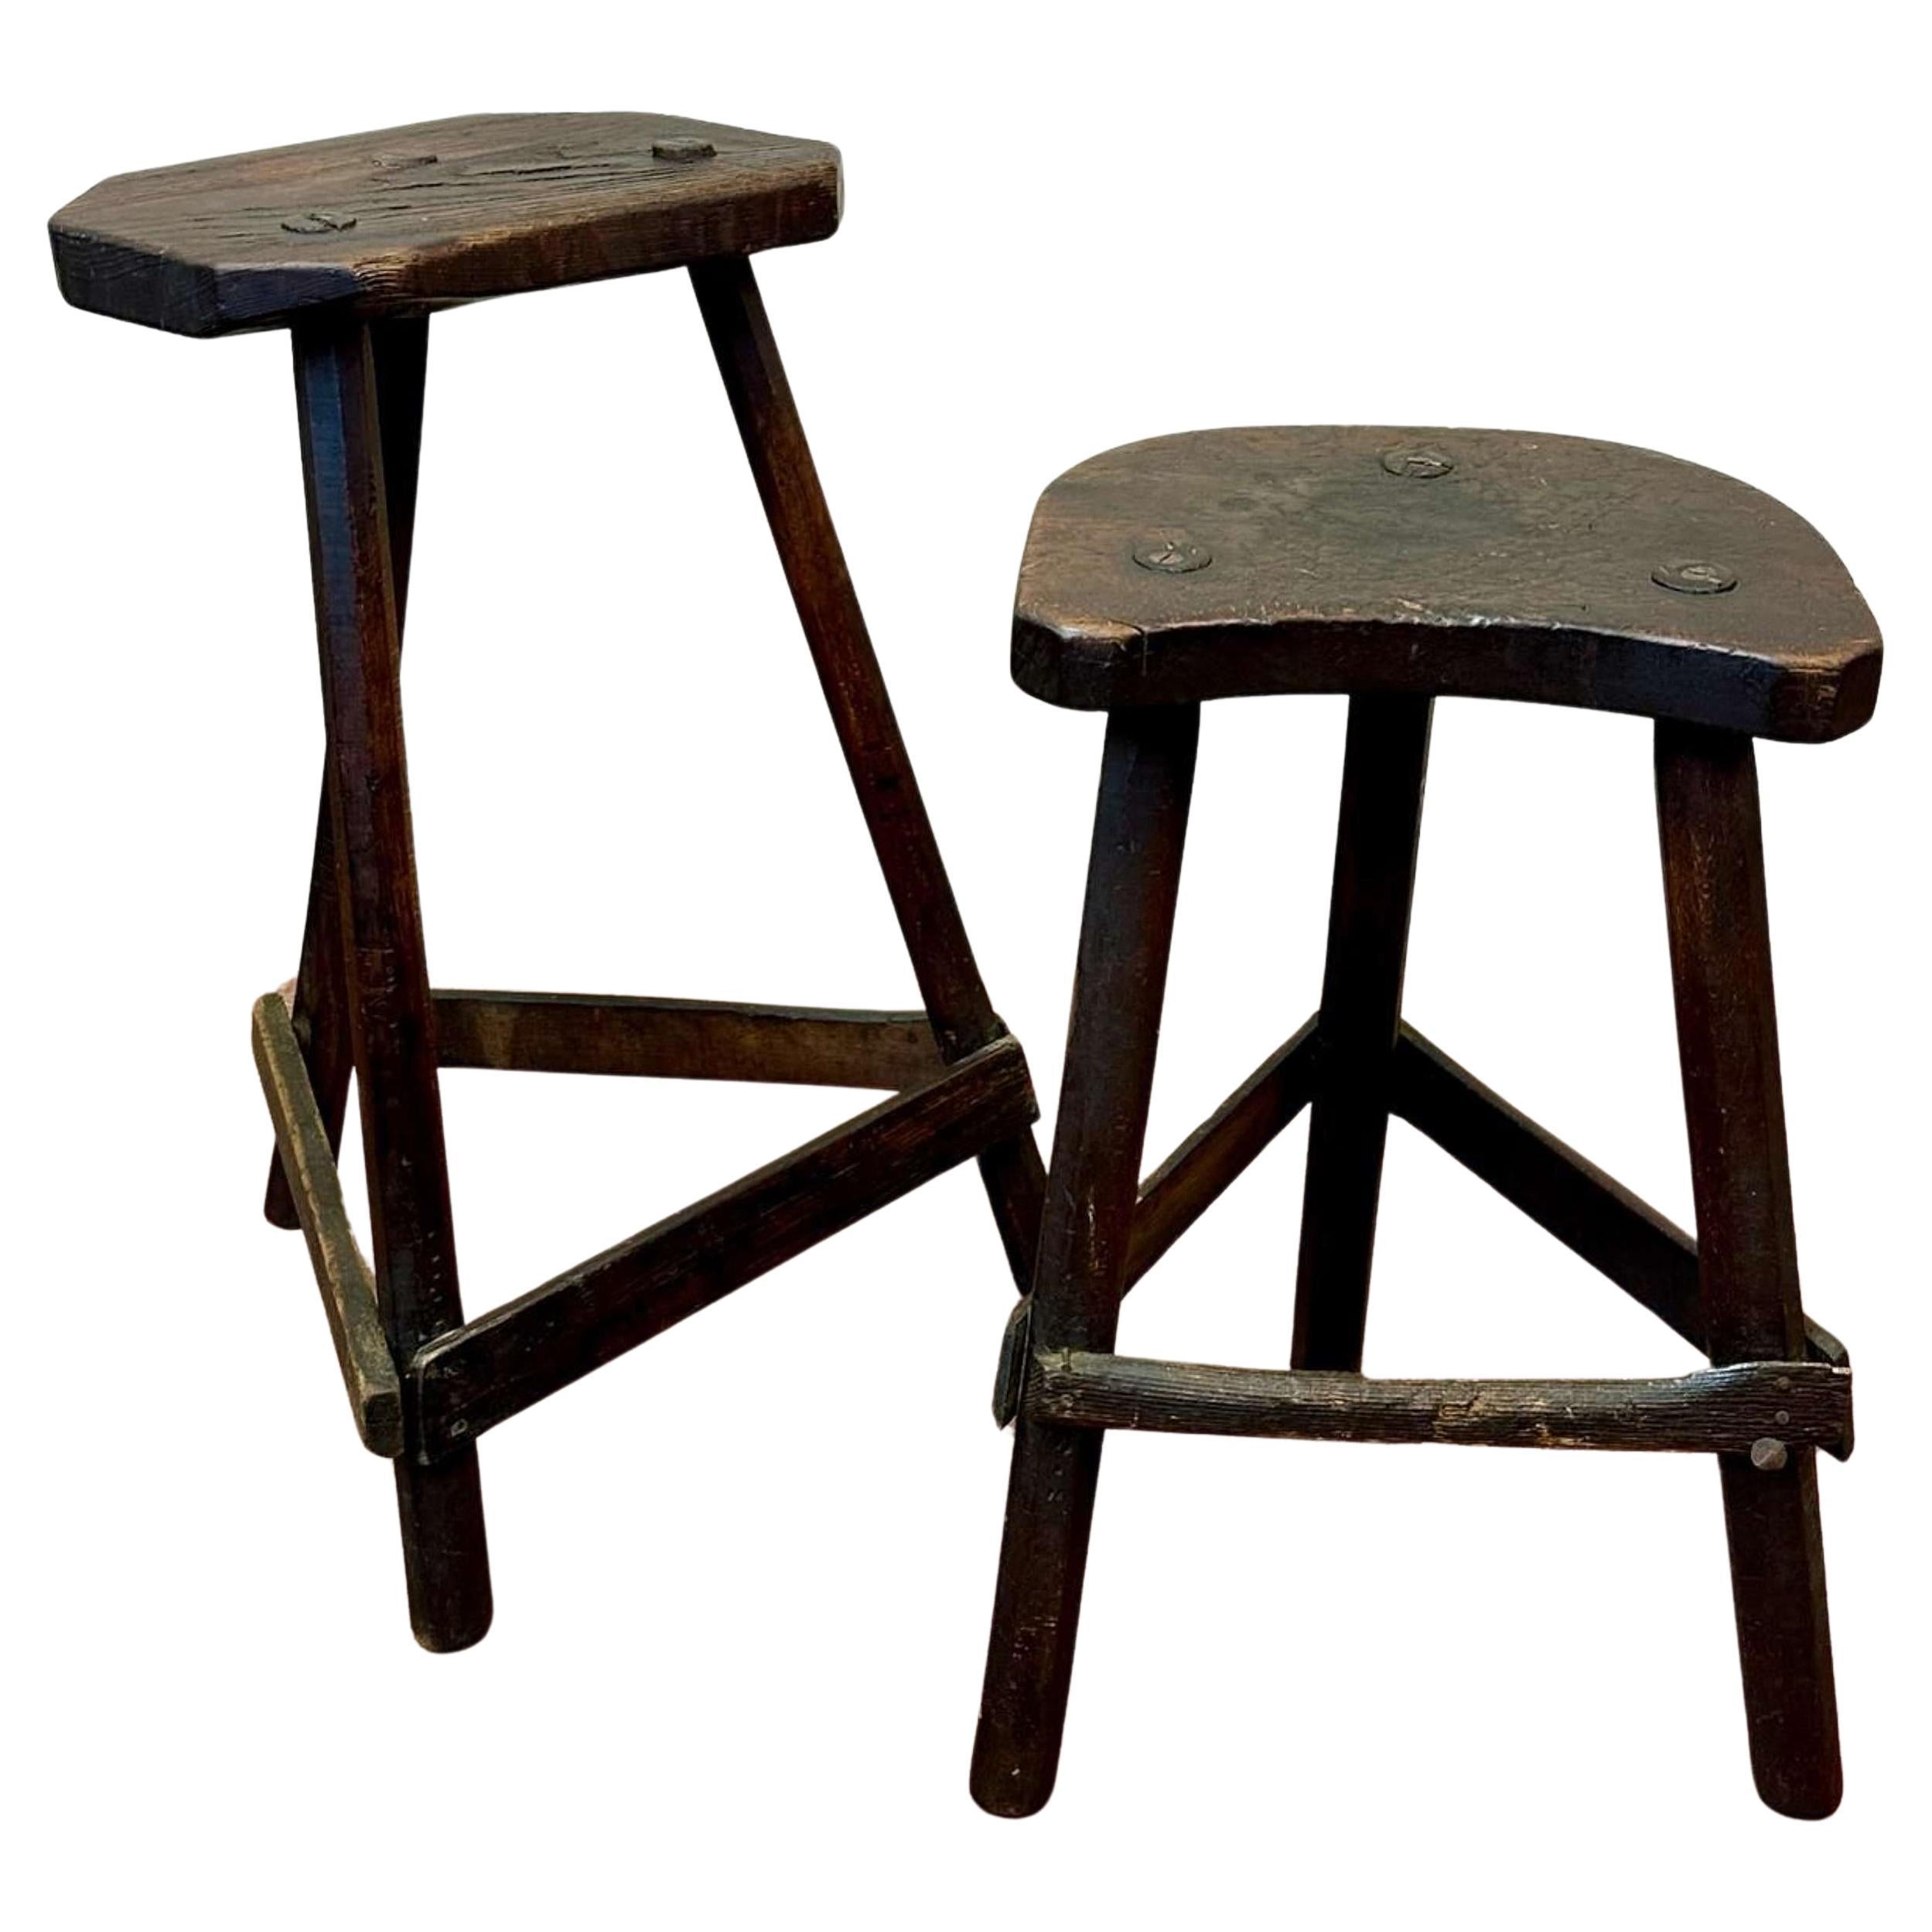 Pair of English c 1900 Cutler / Silversmiths Stools For Sale